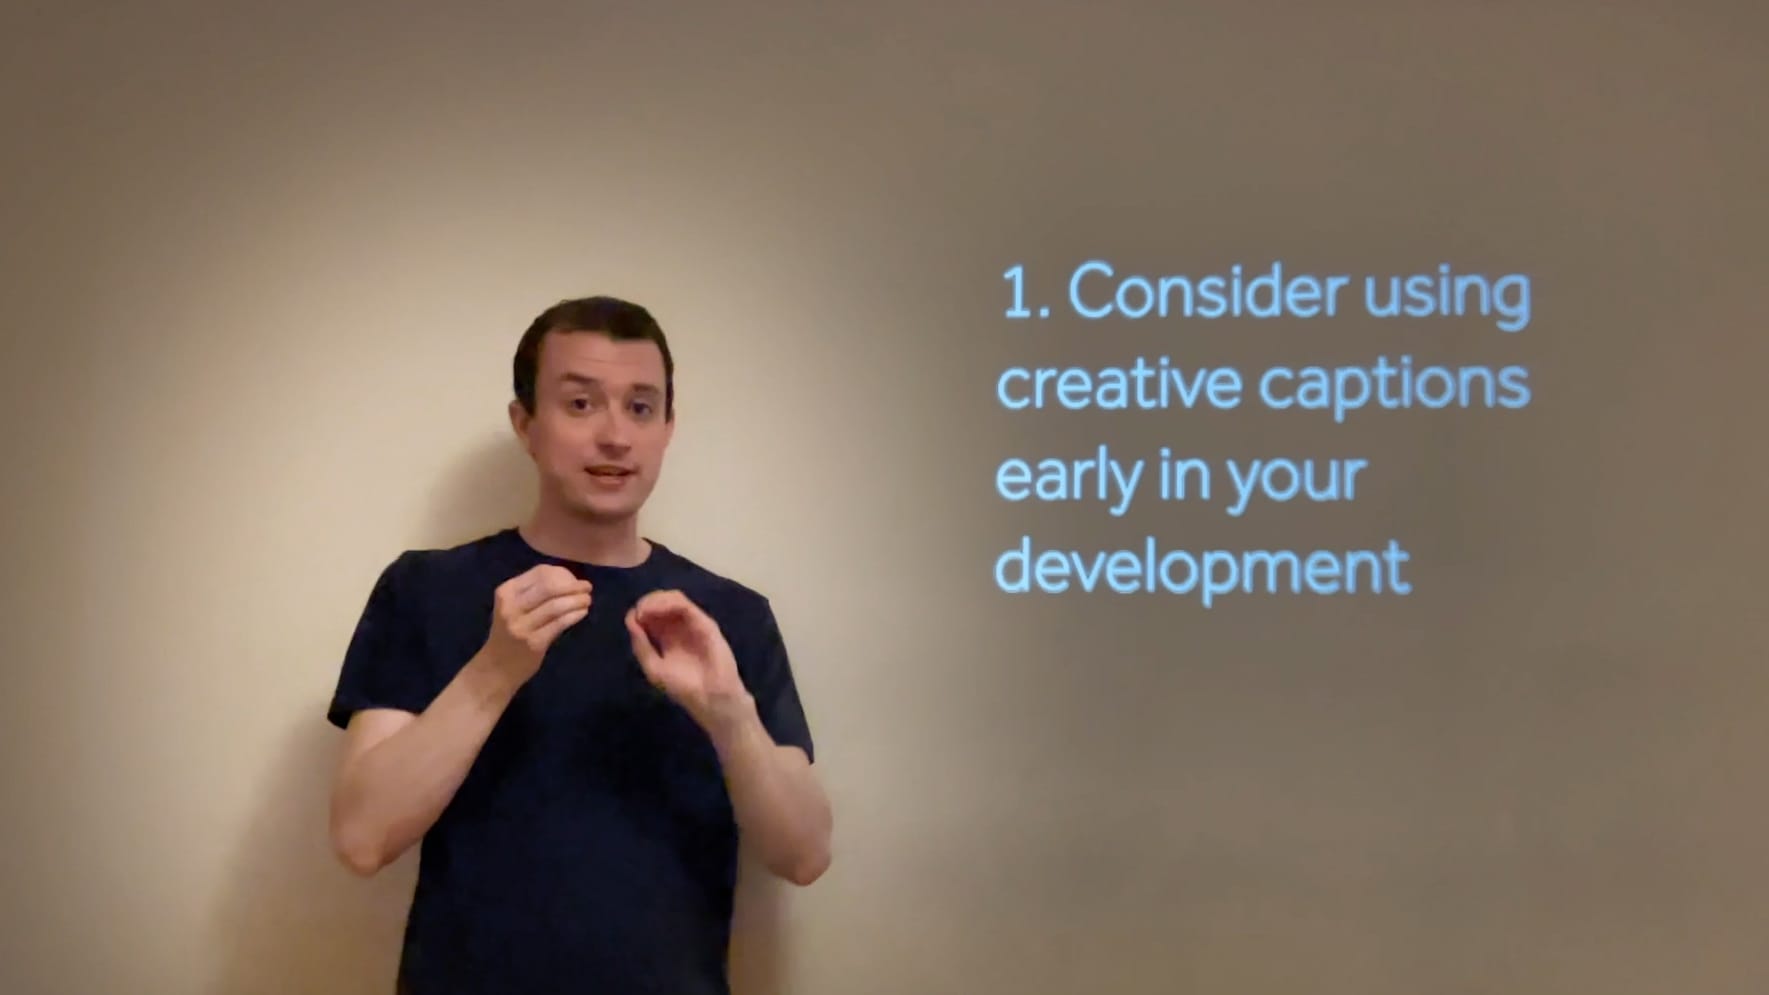 A man signing in front of captions saying 1. Consider using creative captions early in your development